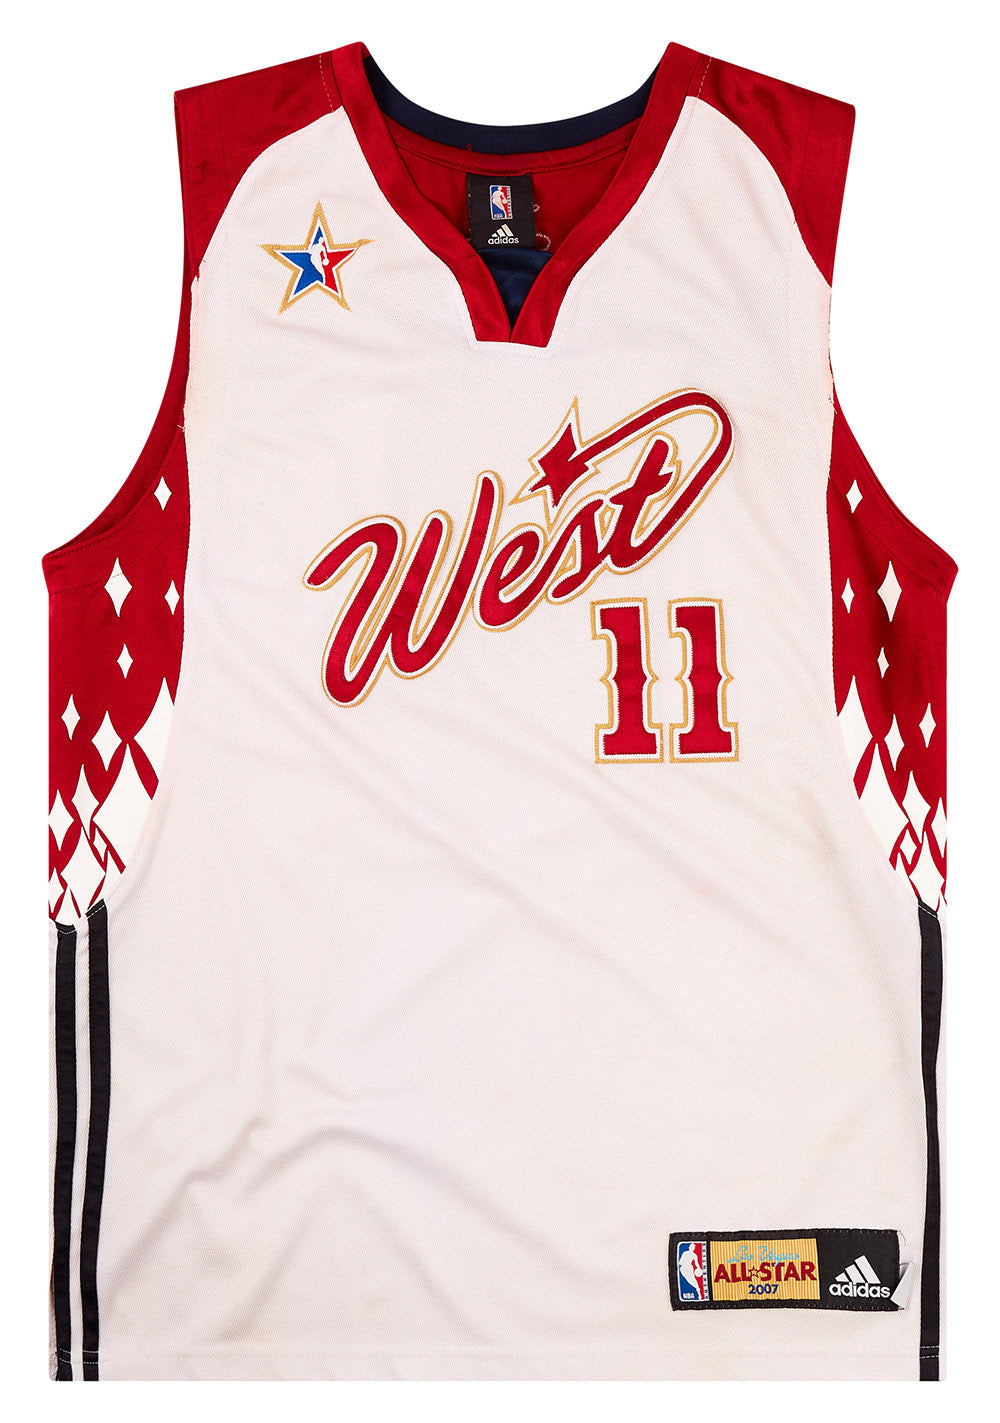 All Star 2007 Authentic AMERICAN Majestic Game Jersey